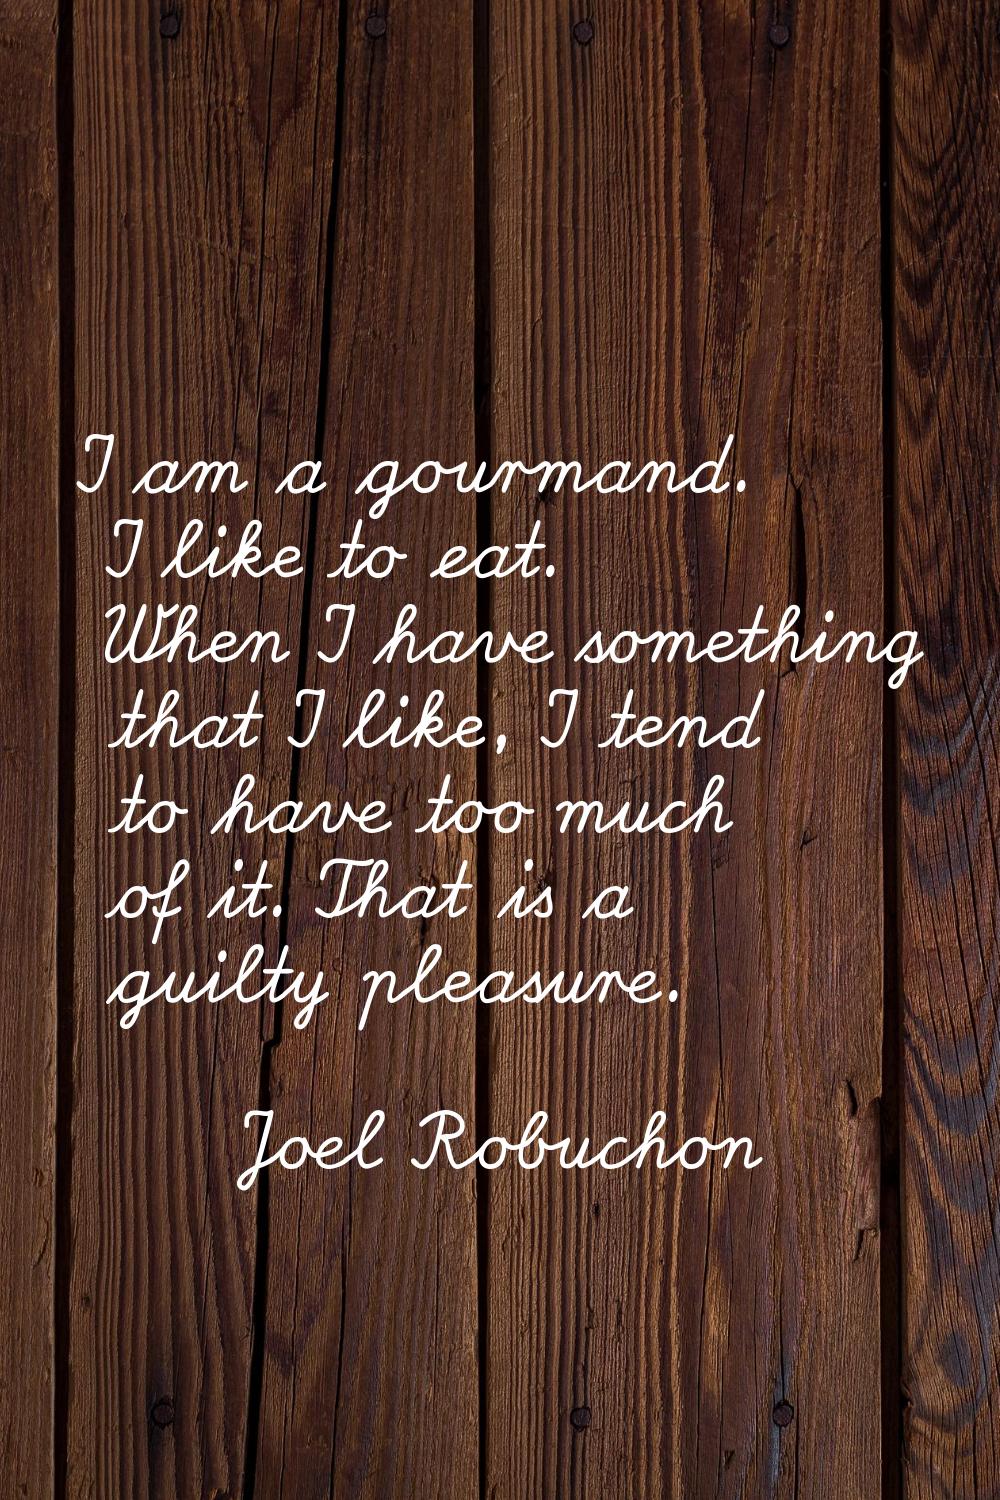 I am a gourmand. I like to eat. When I have something that I like, I tend to have too much of it. T